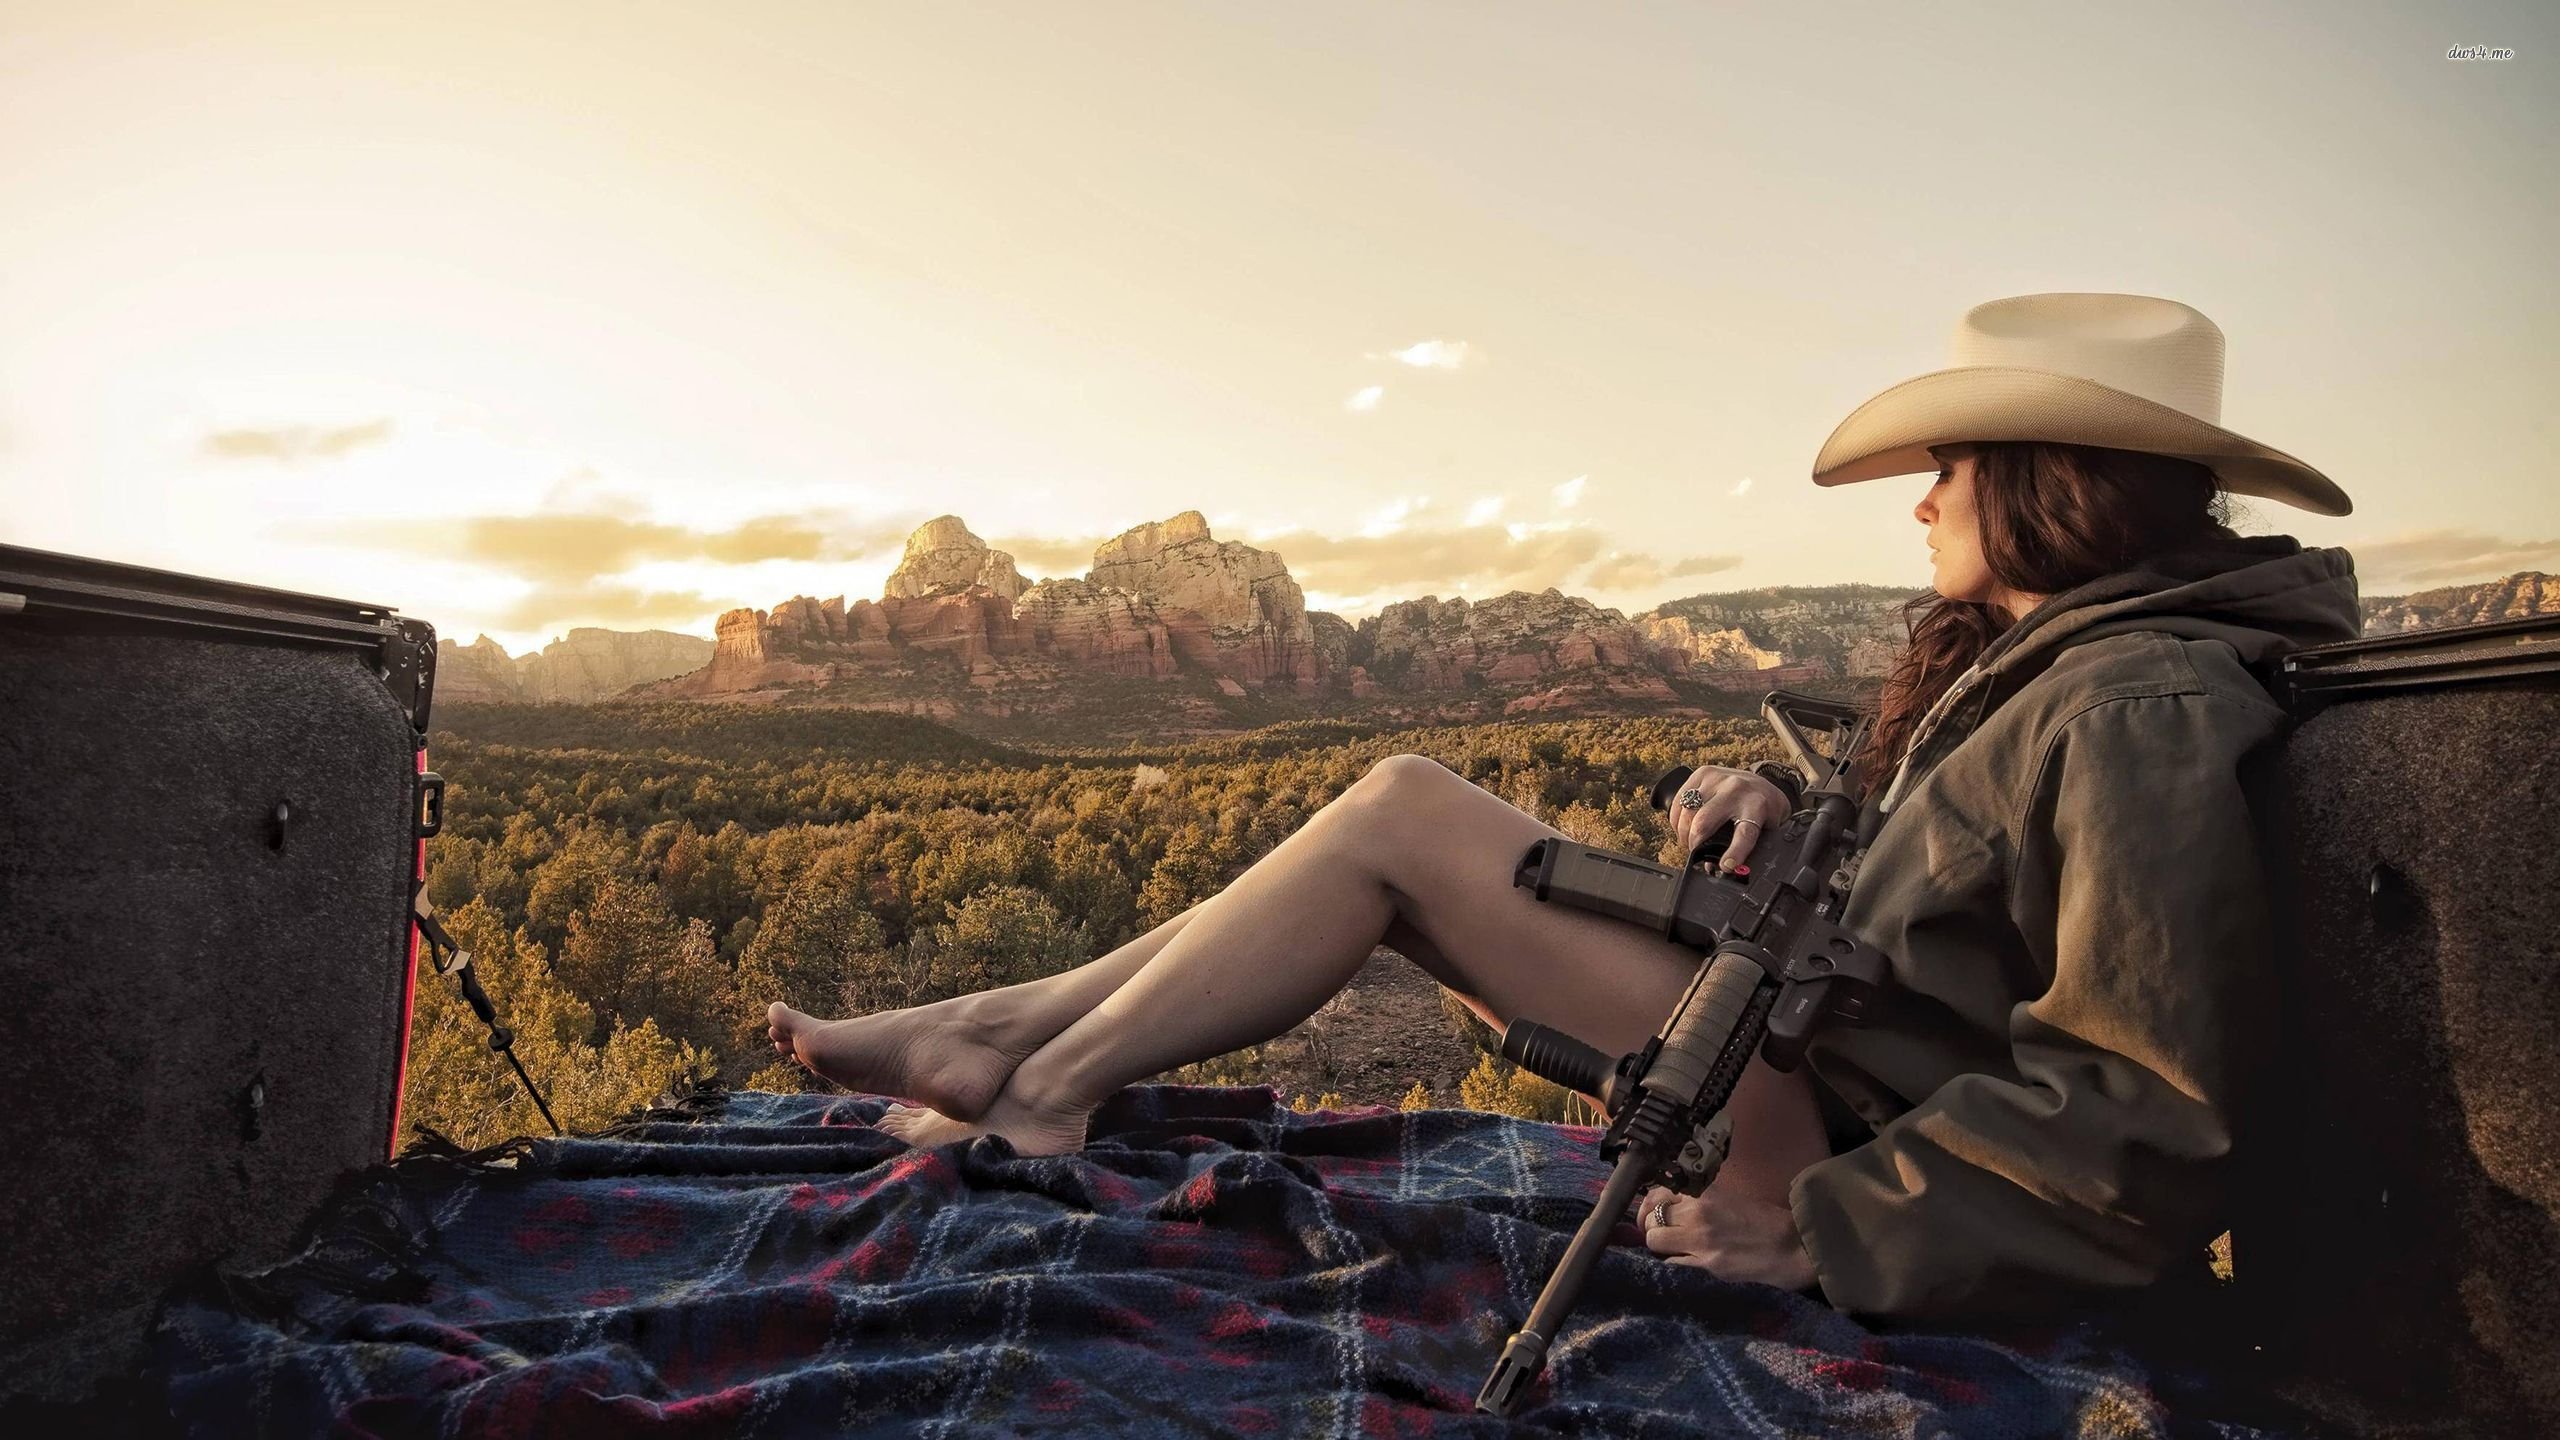 Cowgirl wallpapers, Women, HQ Cowgirl pictures | 4K Wallpapers 2019